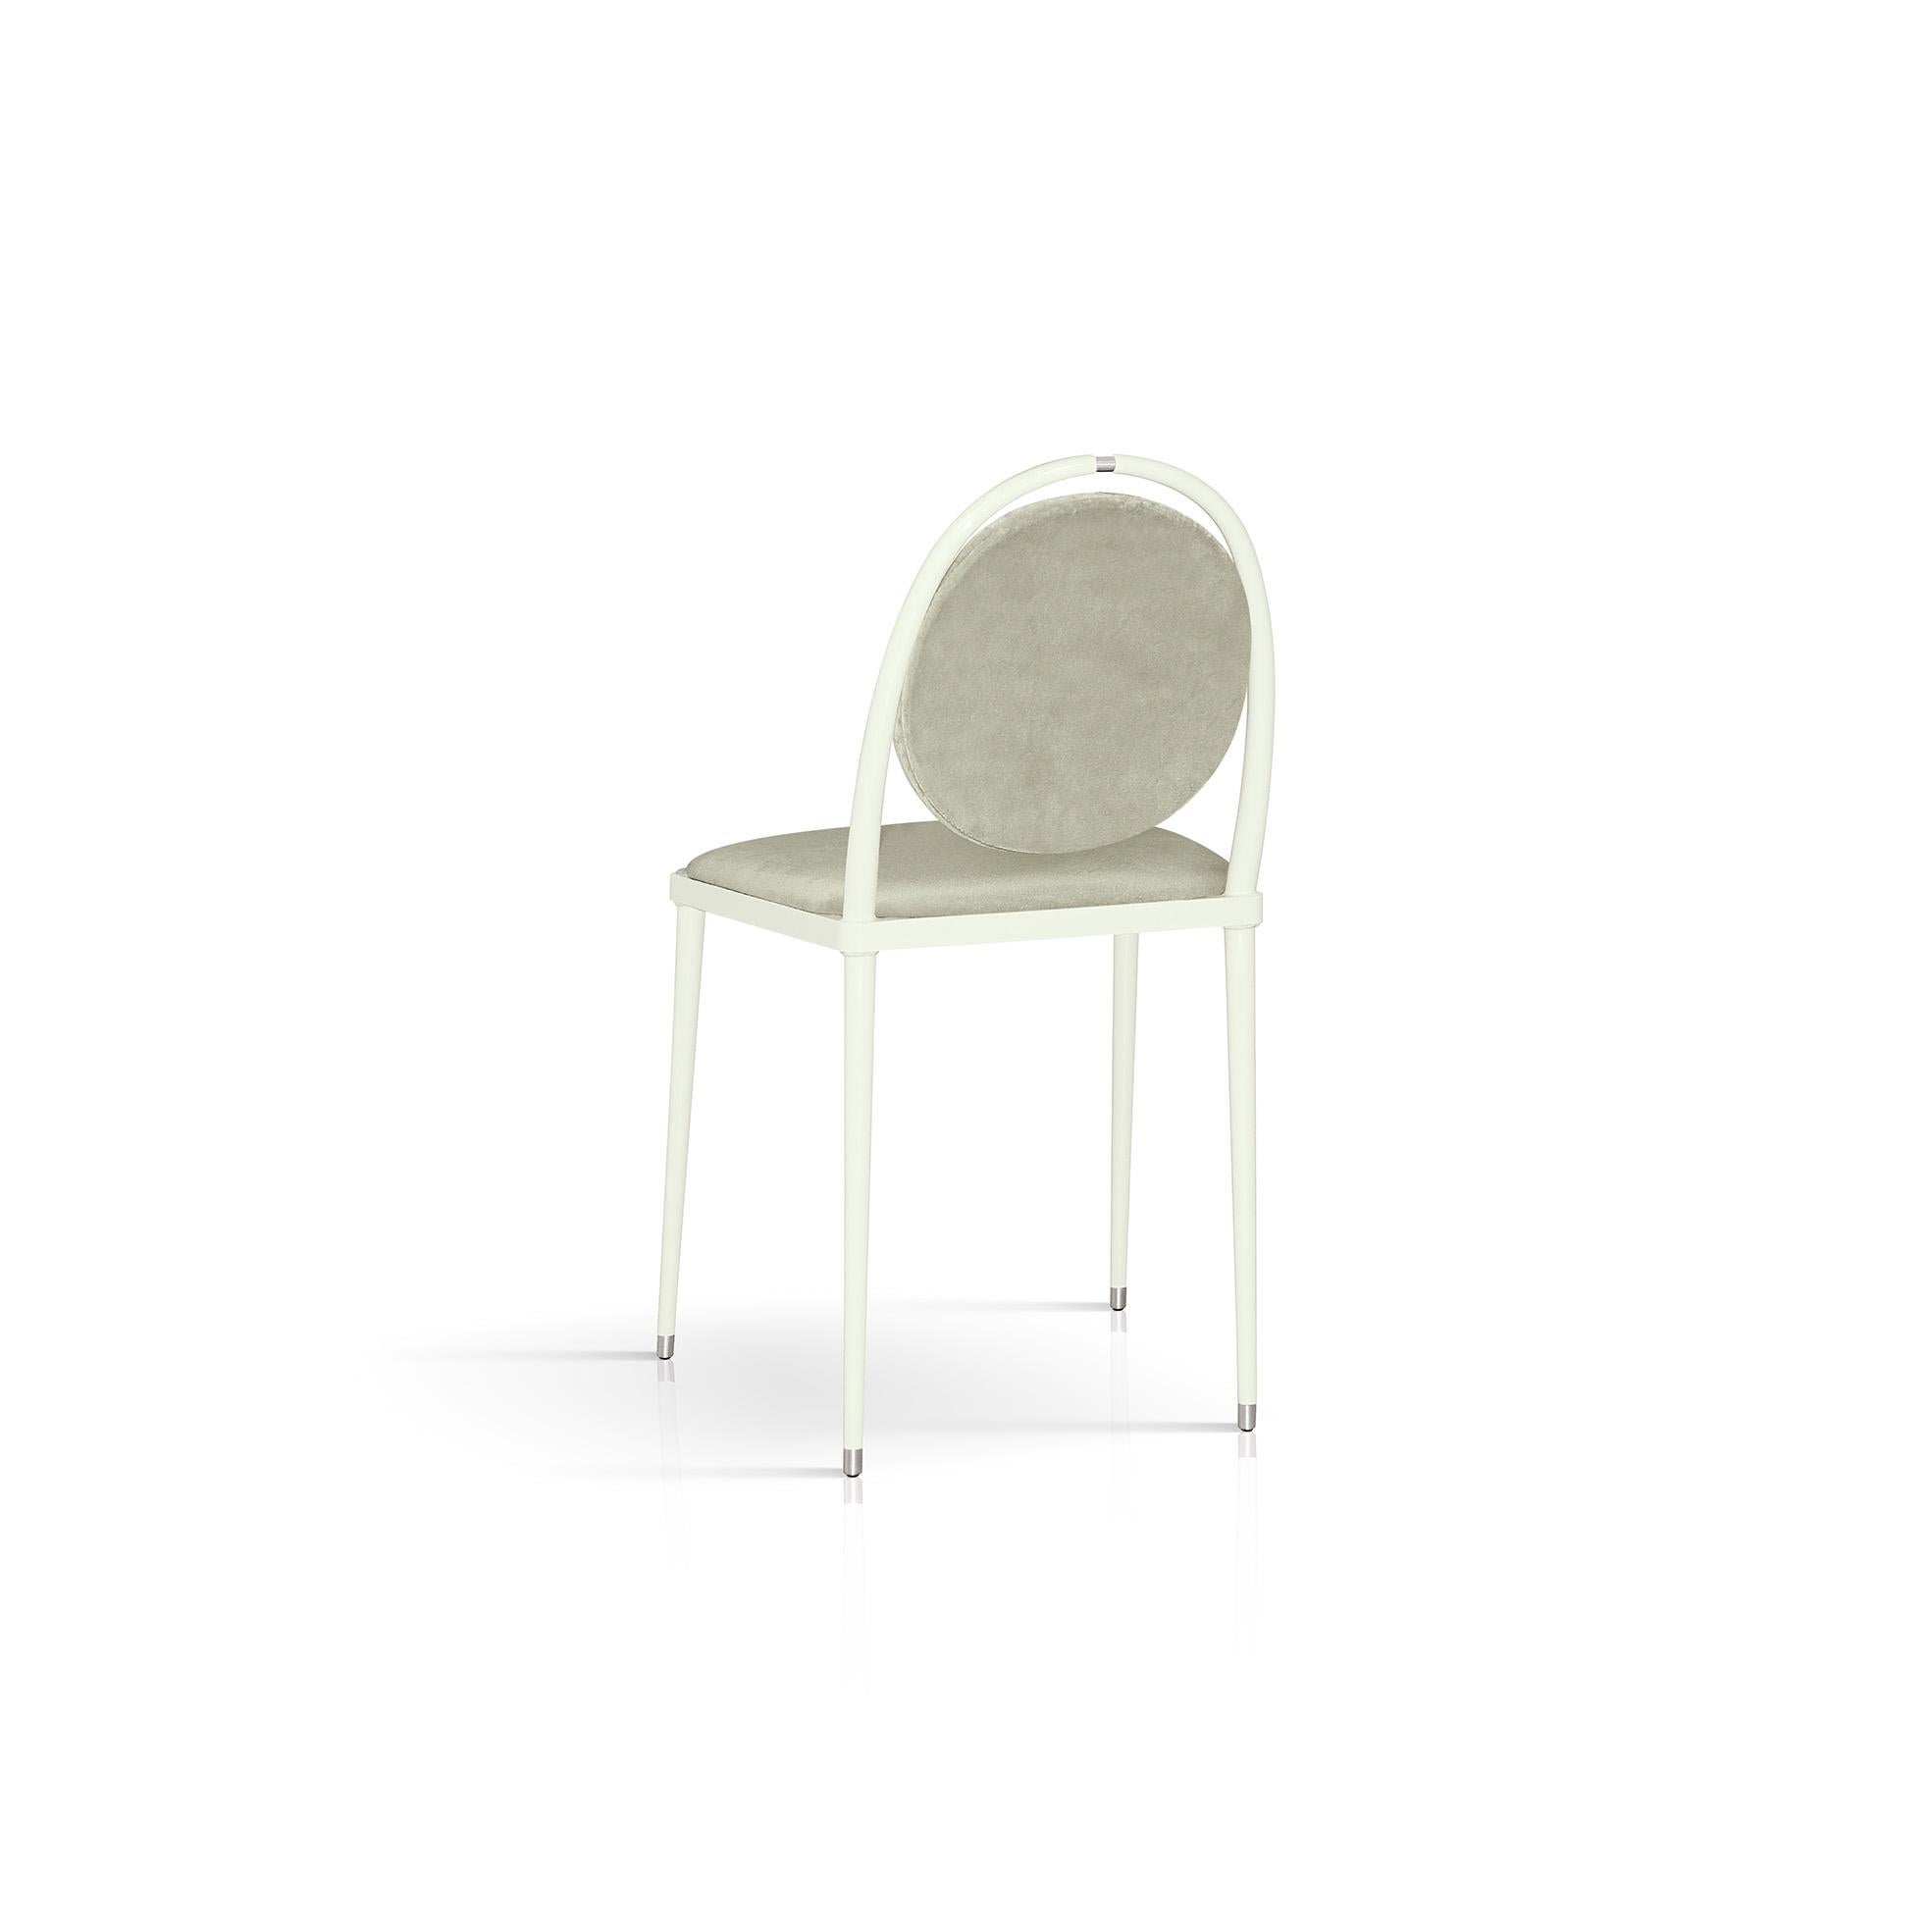 A simple and modern aesthetics enriched with refined details, this chair of the Balzaretti series features a medallion backrest and generous square seat upholstered in soft mint green velvet. The ergonomic design and the glossy ivory metal frame